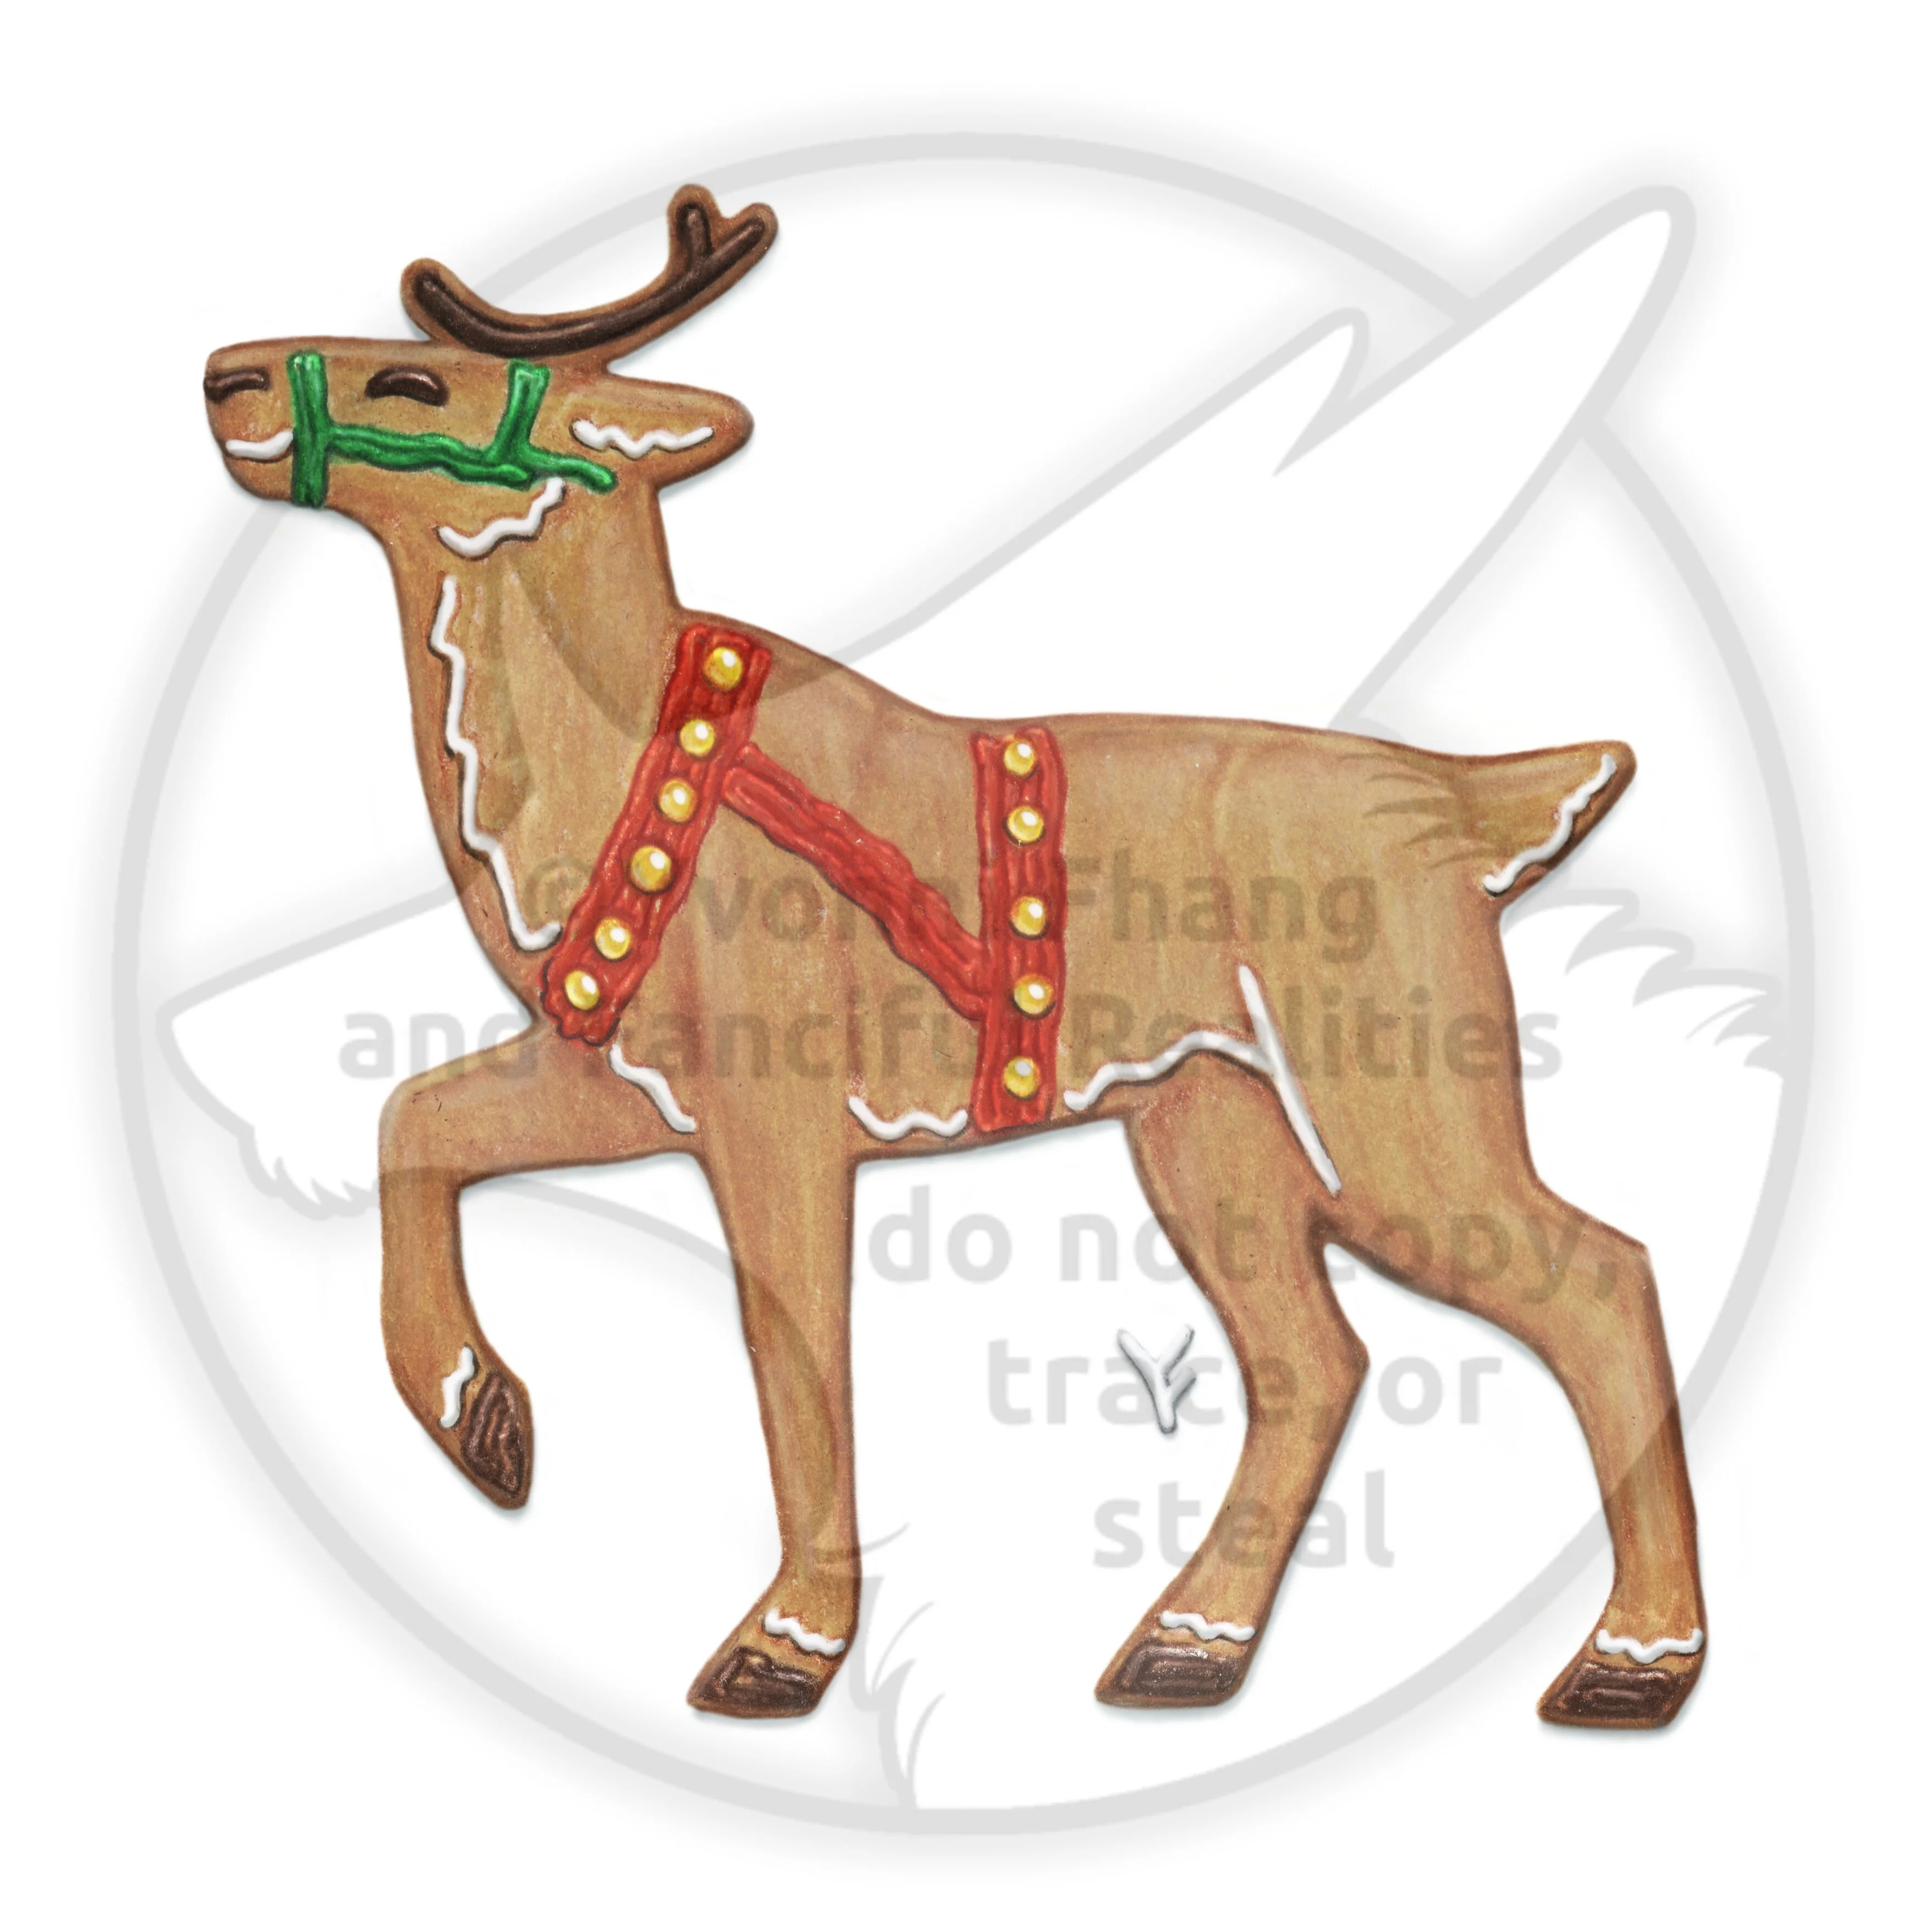 A holiday hybrid of a reindeer and a frosted Christmas Cookie!